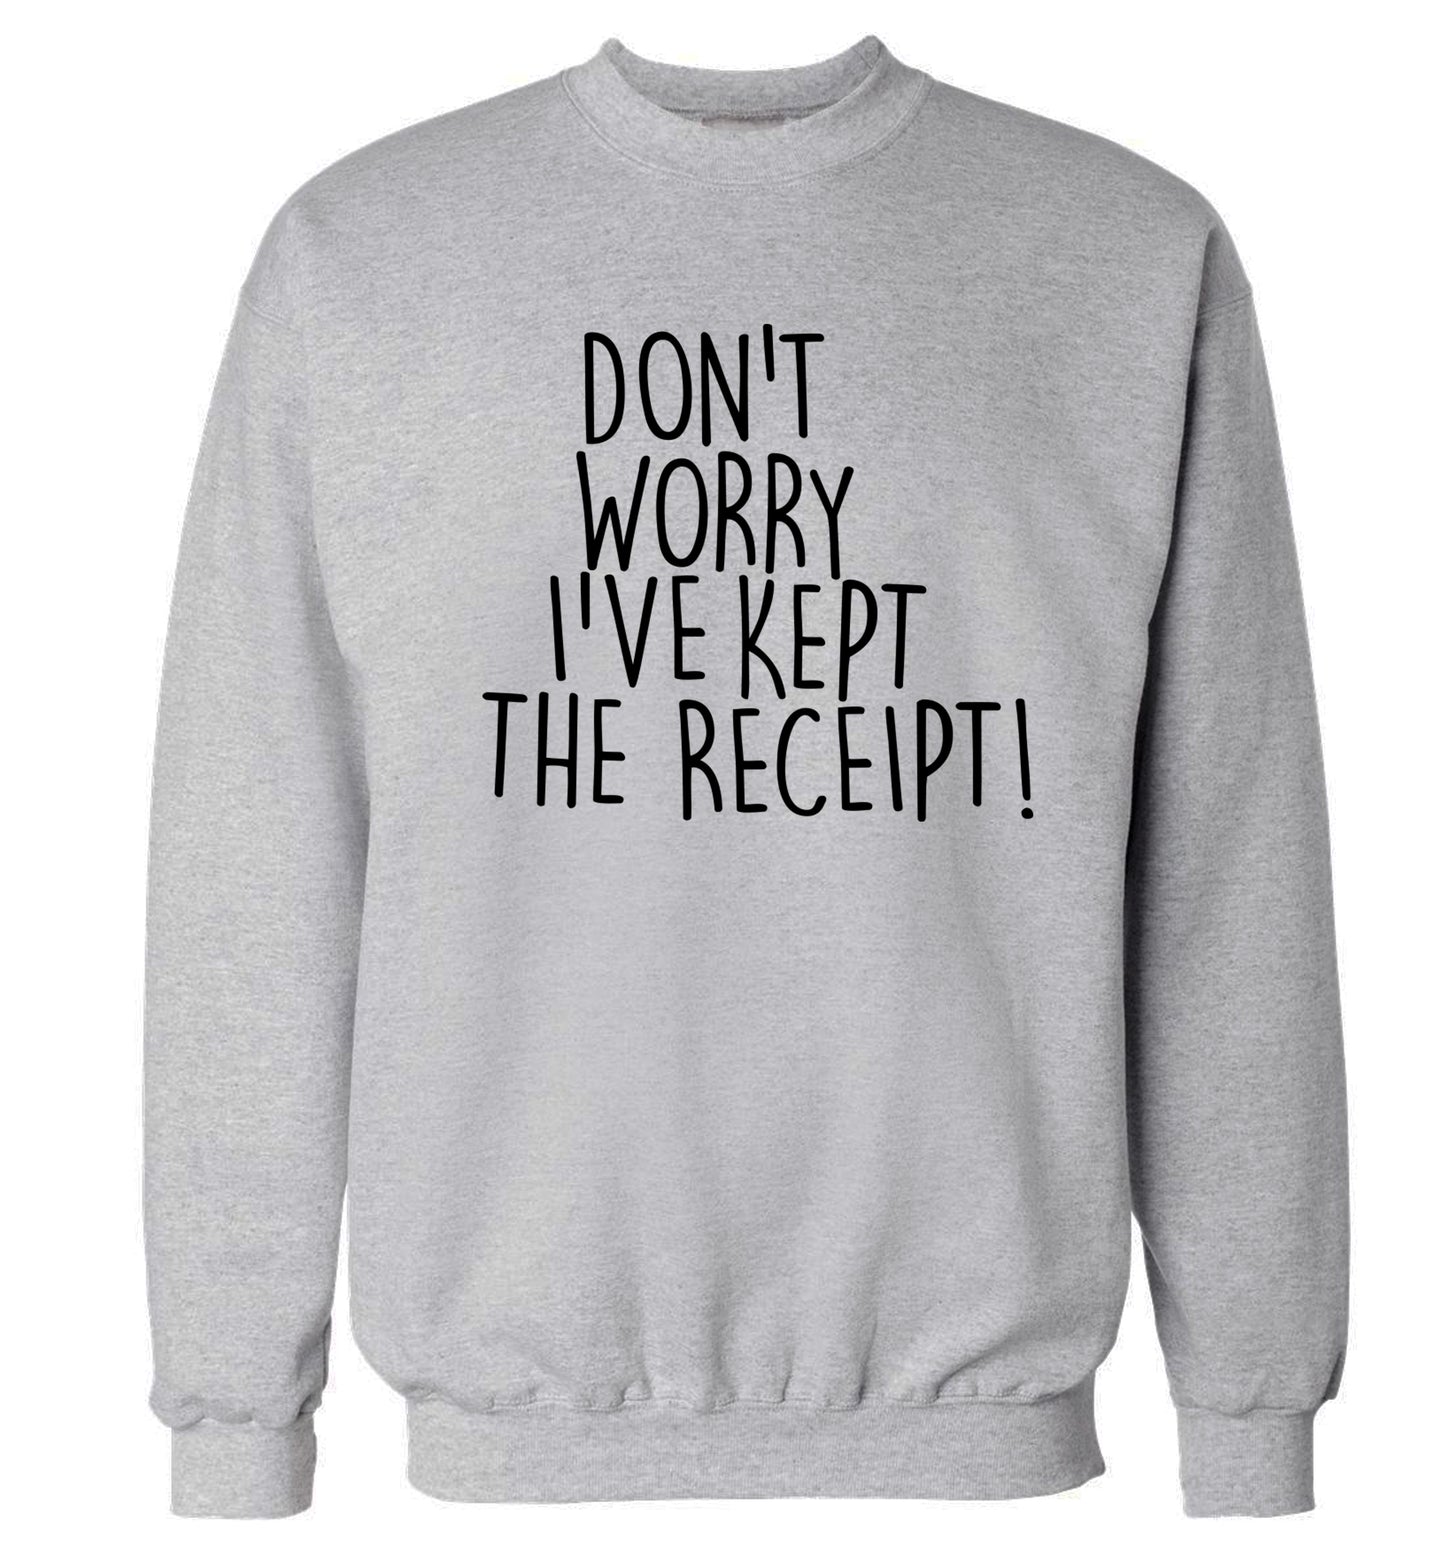 Don't Worry I've Kept the Receipt Adult's unisex grey Sweater 2XL